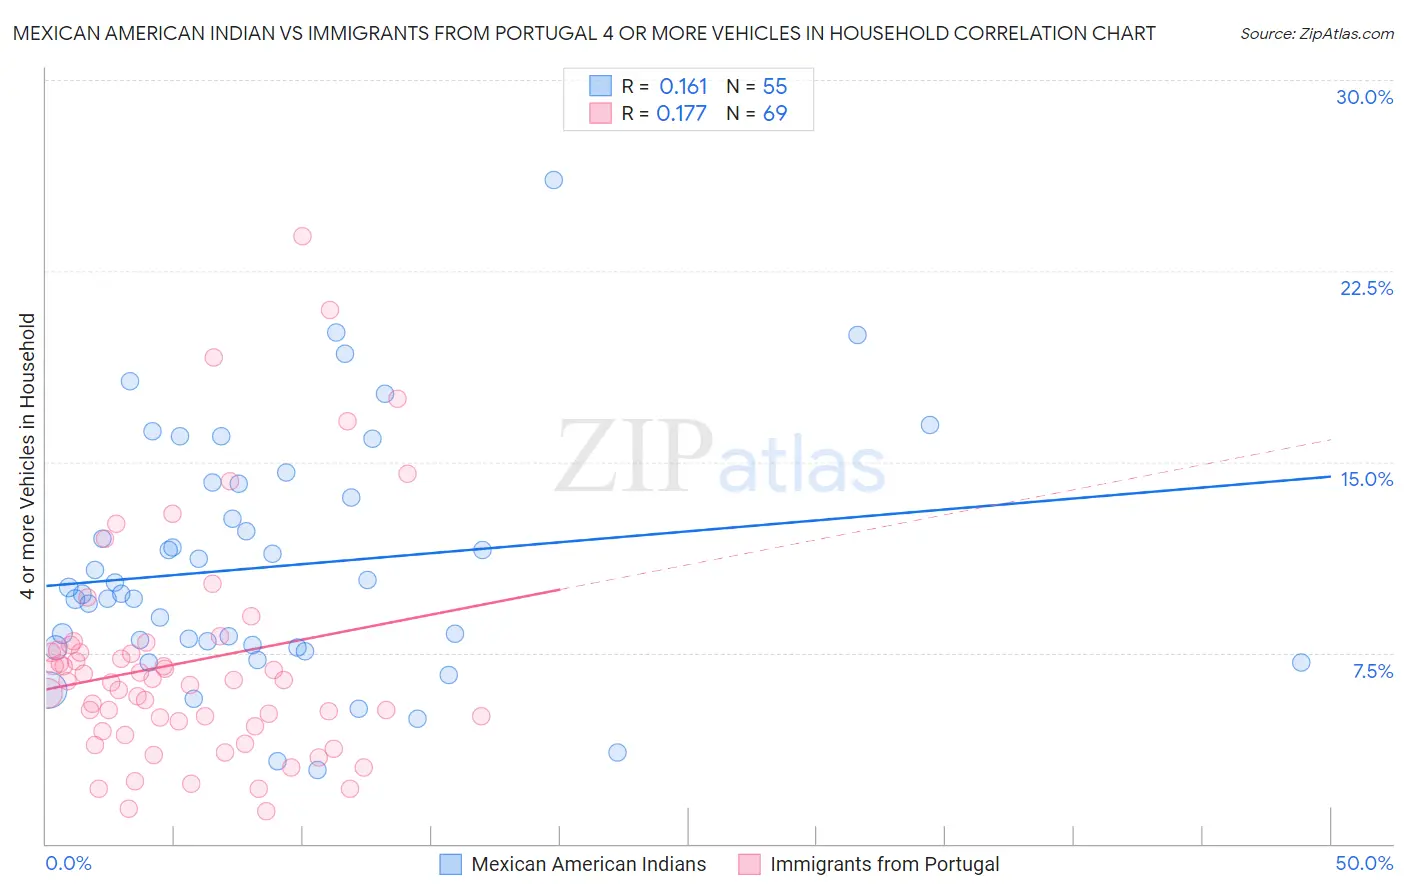 Mexican American Indian vs Immigrants from Portugal 4 or more Vehicles in Household